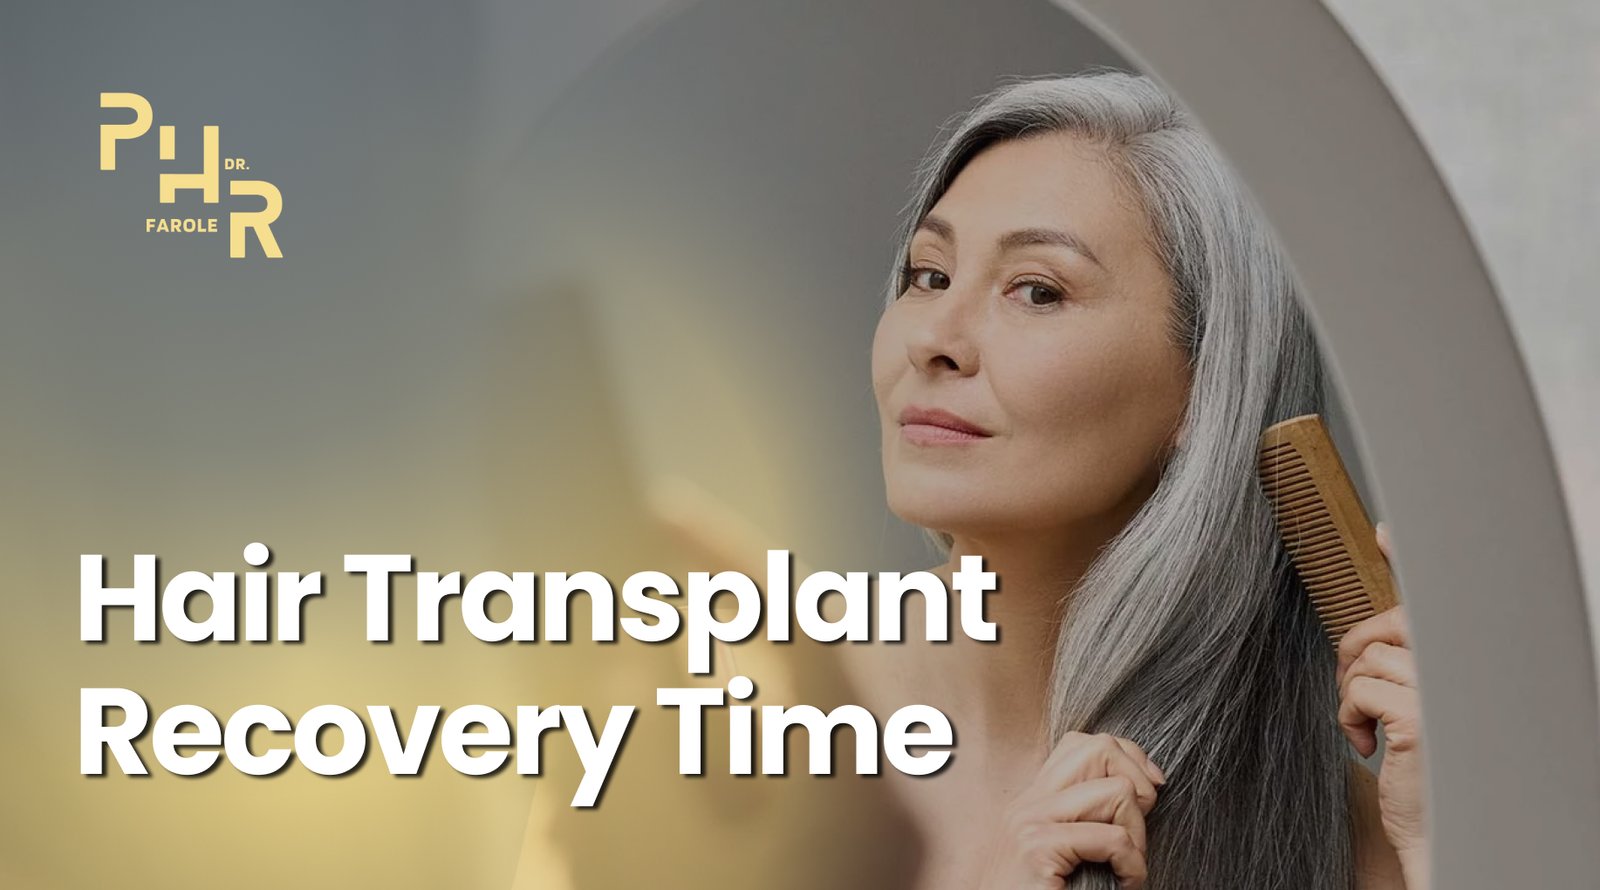 What Is The Average Hair Transplant Recovery Time?